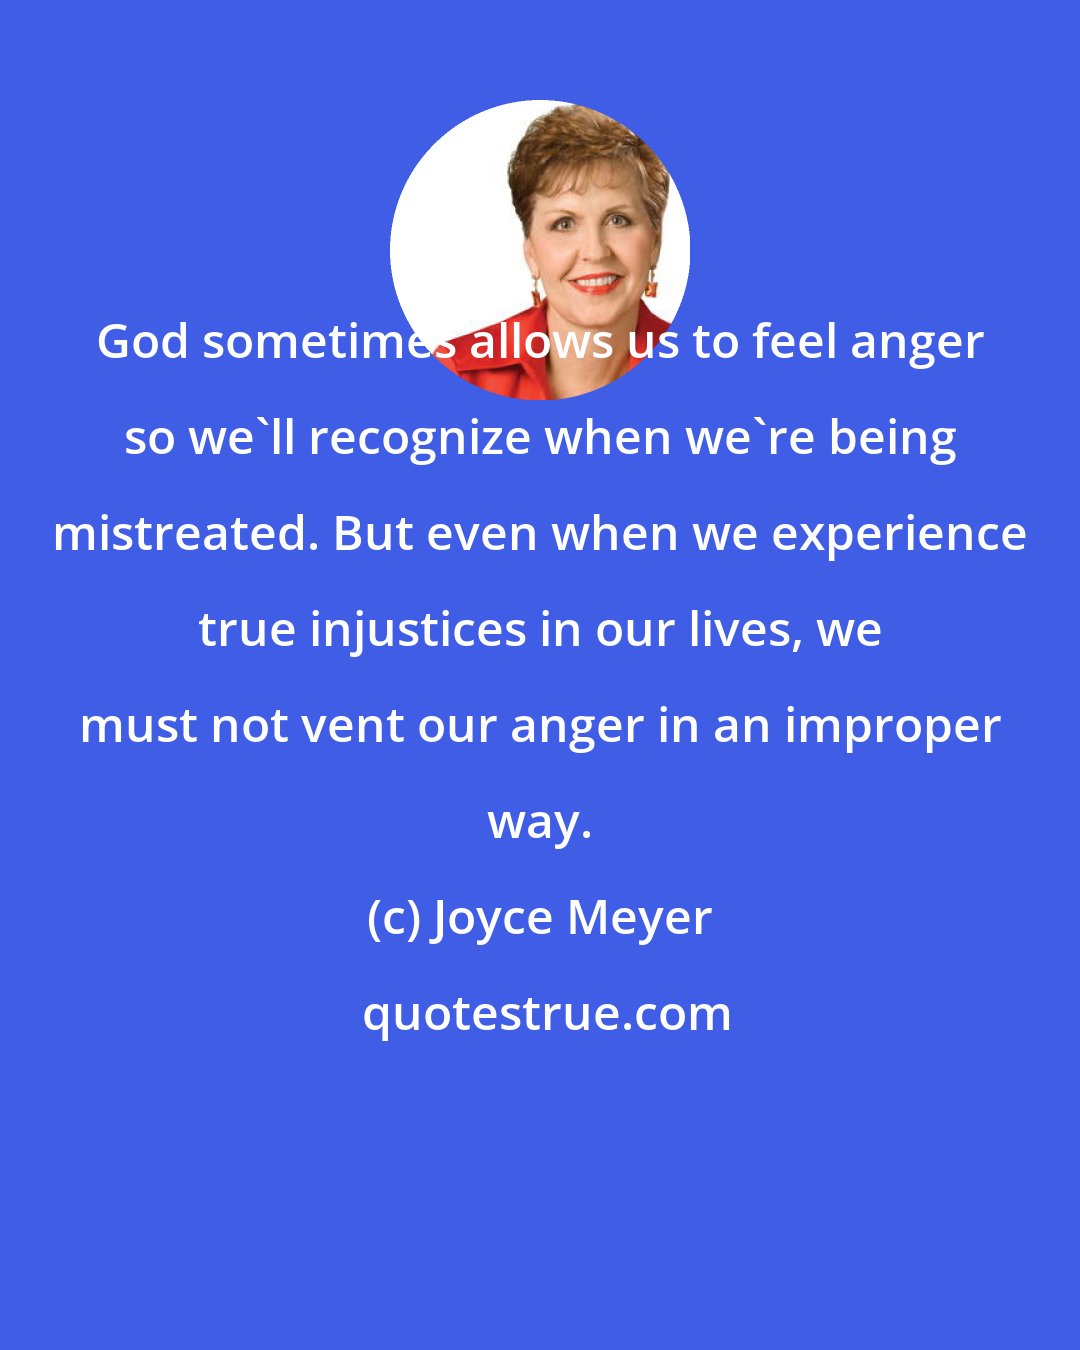 Joyce Meyer: God sometimes allows us to feel anger so we'll recognize when we're being mistreated. But even when we experience true injustices in our lives, we must not vent our anger in an improper way.